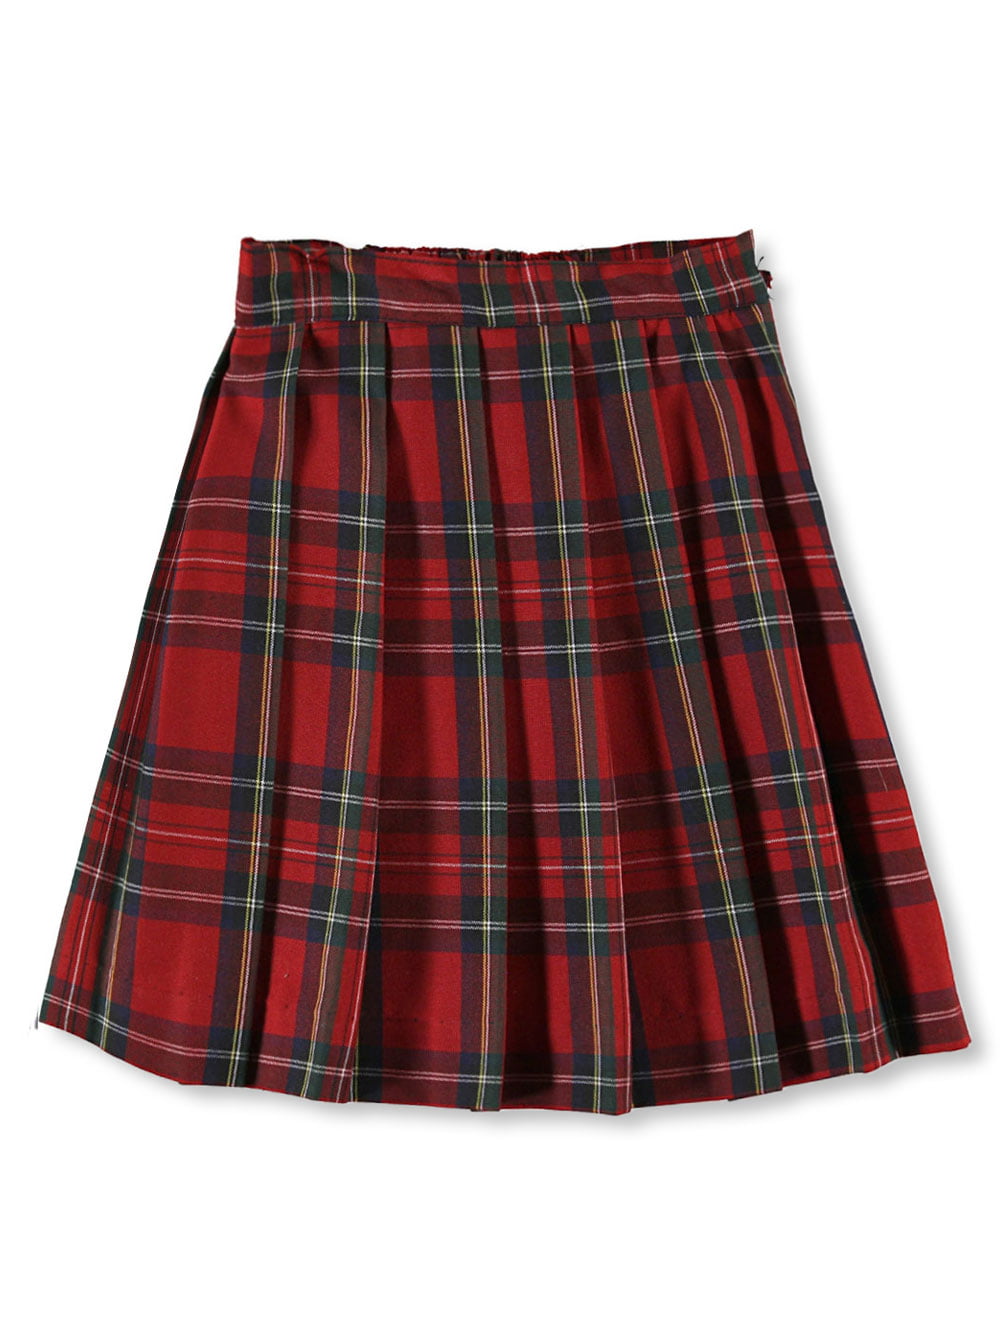 Red And Yellow Pleated Skirt | lupon.gov.ph